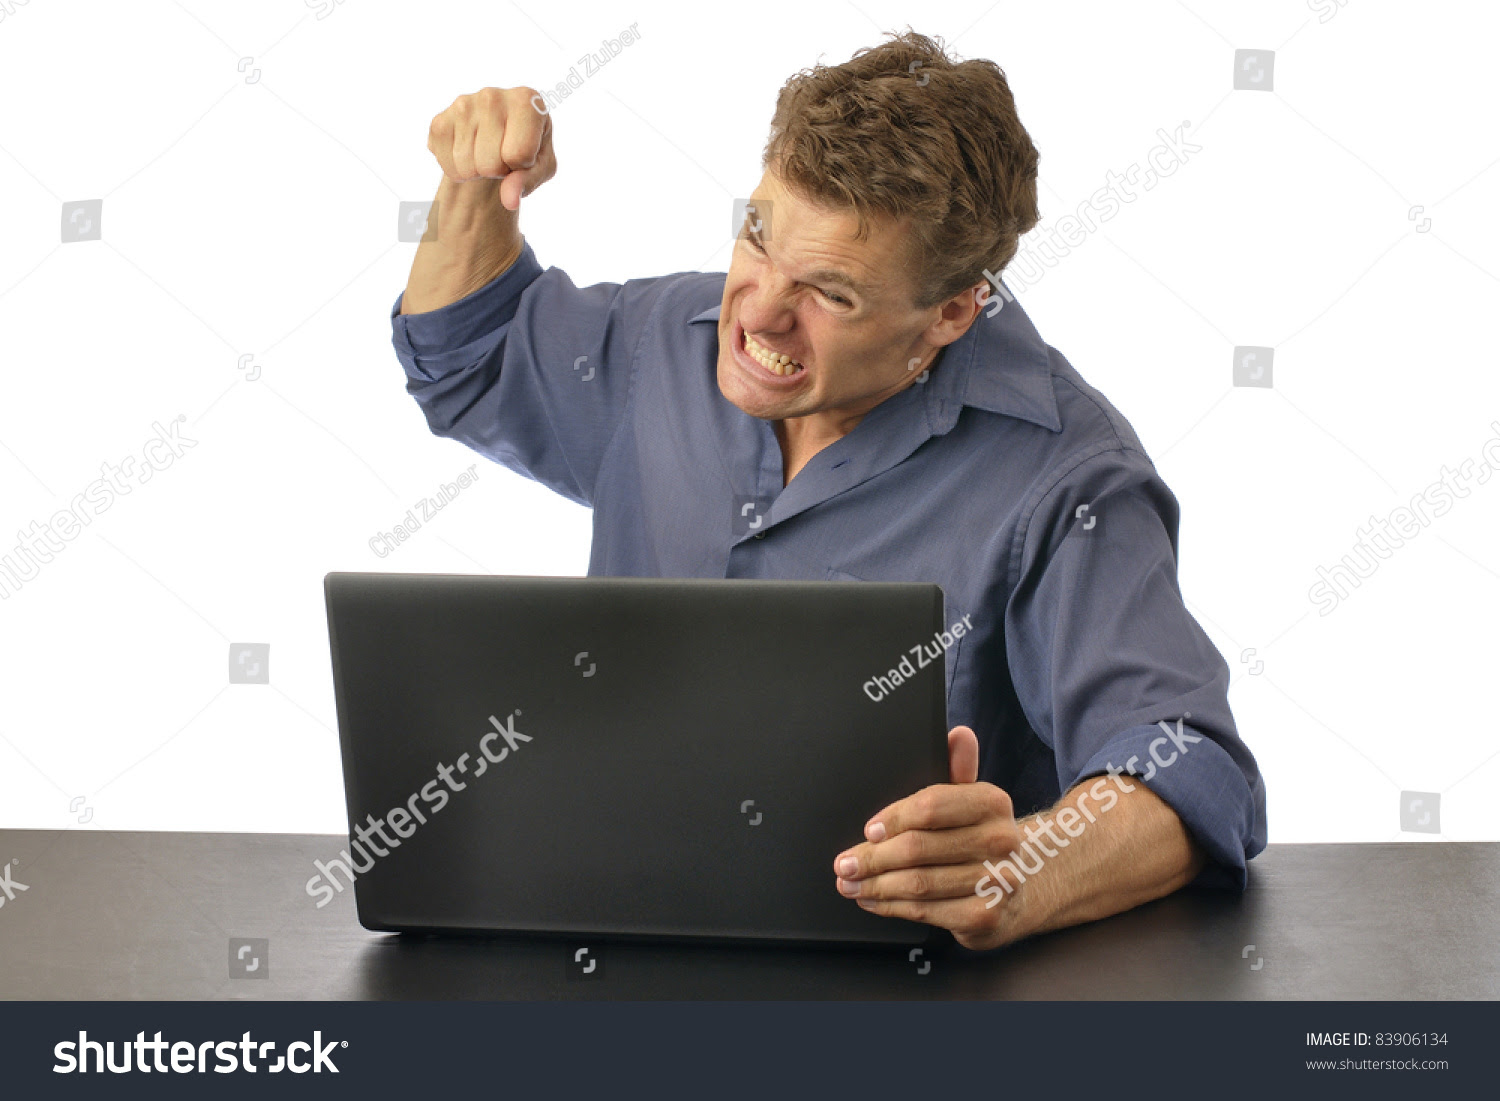 http://image.shutterstock.com/z/stock-photo-angry-man-punching-computer-isolated-on-white-background-83906134.jpg